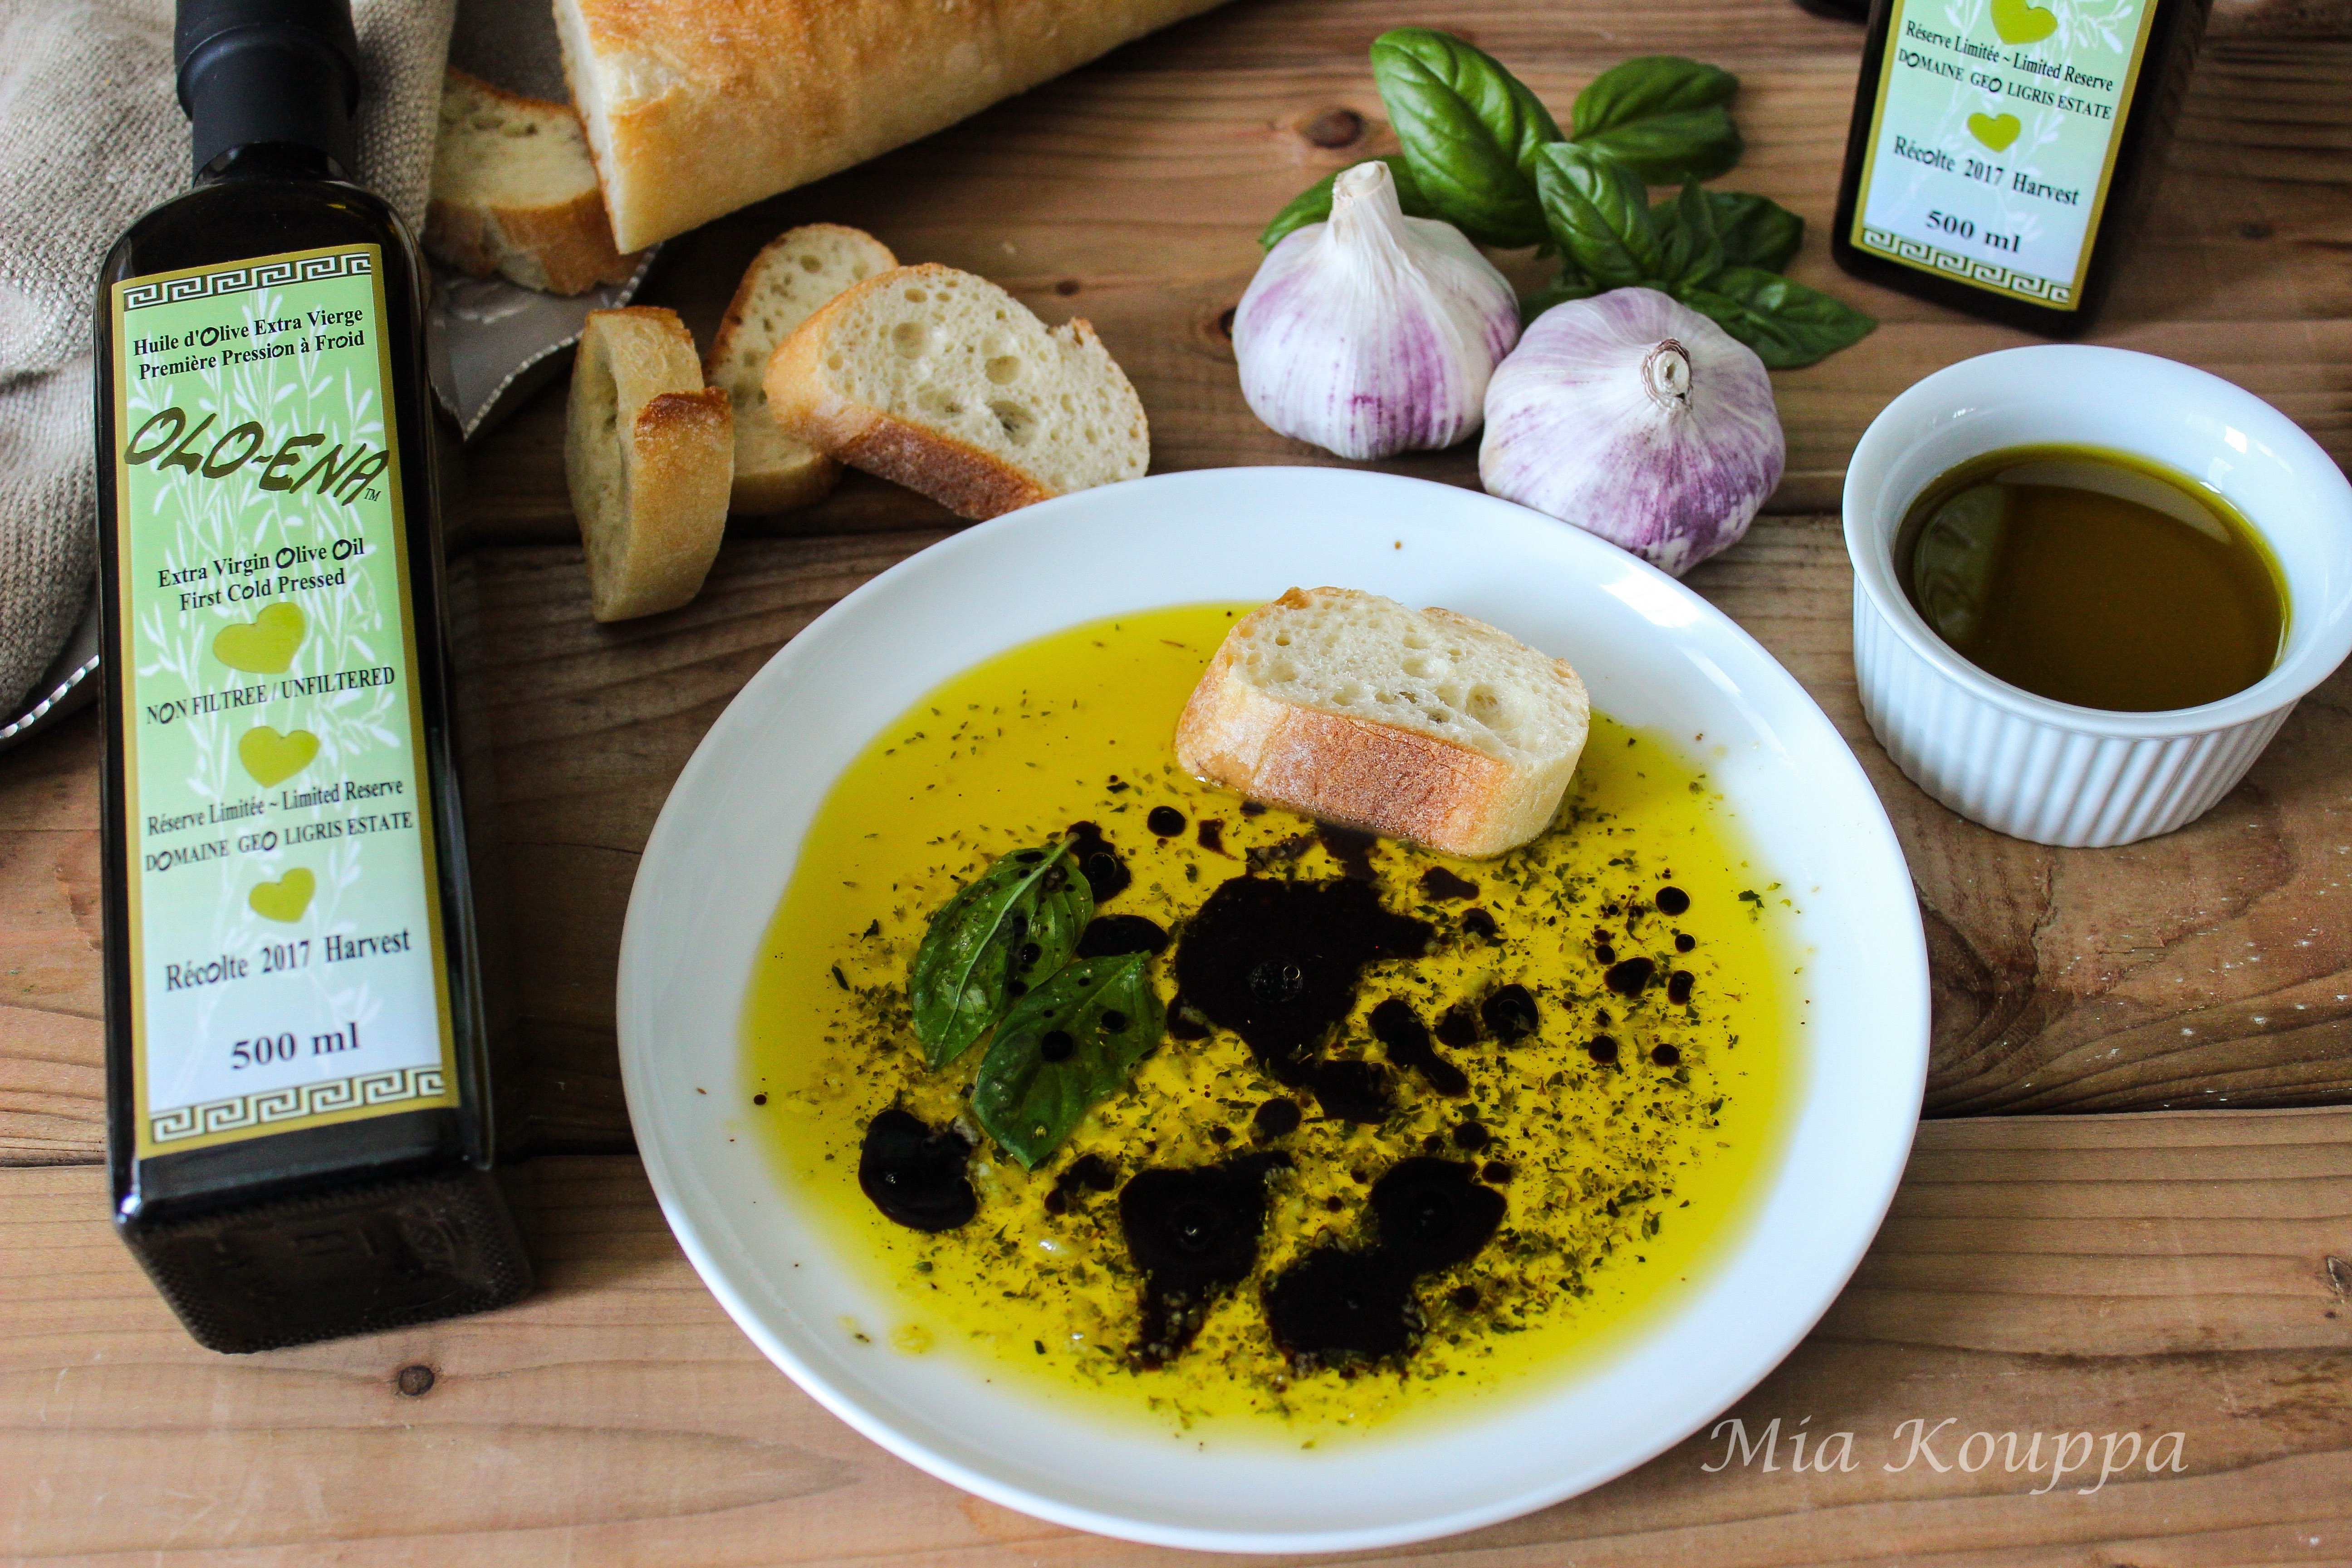 Olive oil dip with balsamic